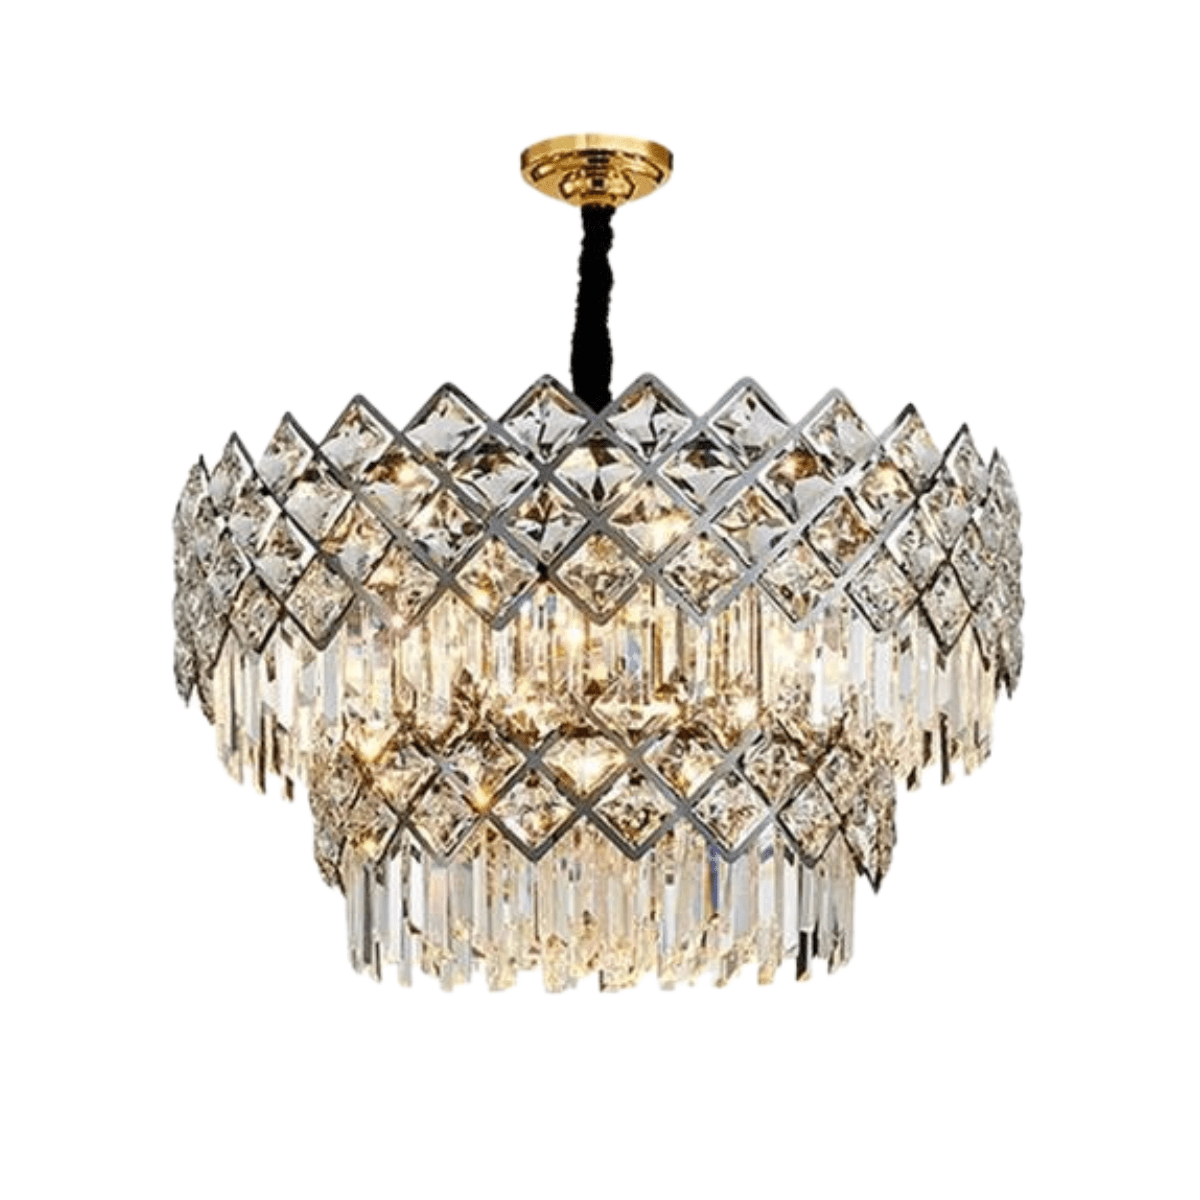 Buy Luxury Modern LED Round Stainless Steel Crystal Ceiling Pendant Chandelier 60cm - 2809 | Shop at Supply Master Accra, Ghana Lamps & Lightings Buy Tools hardware Building materials